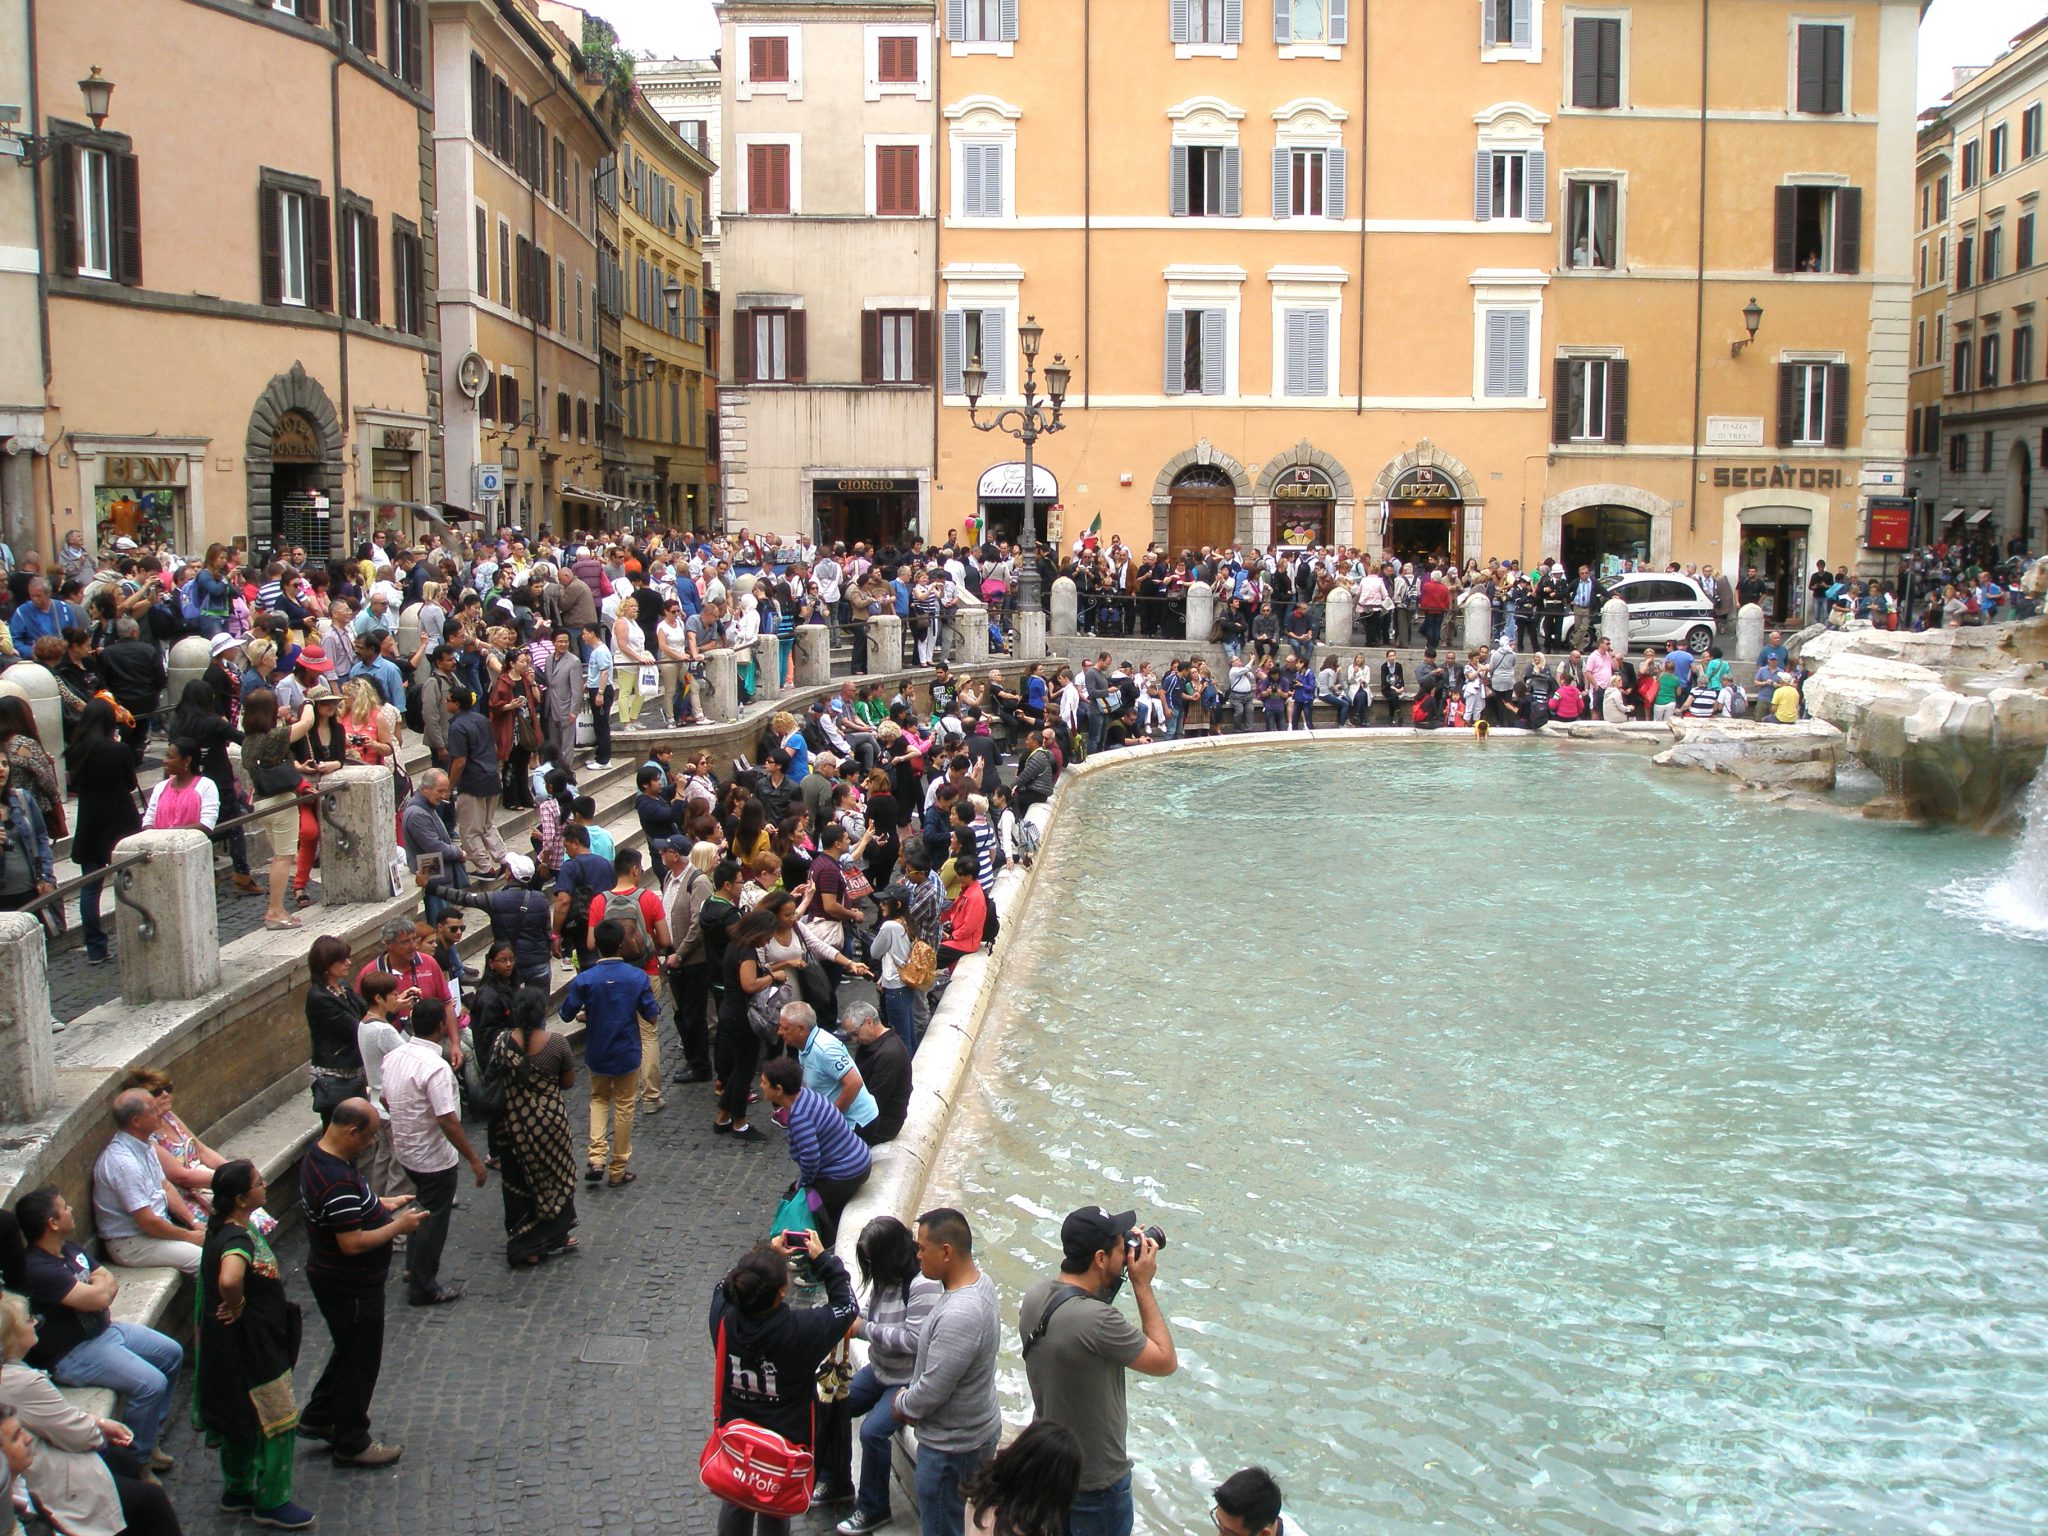 Water's edge, at the Trevi Fountain